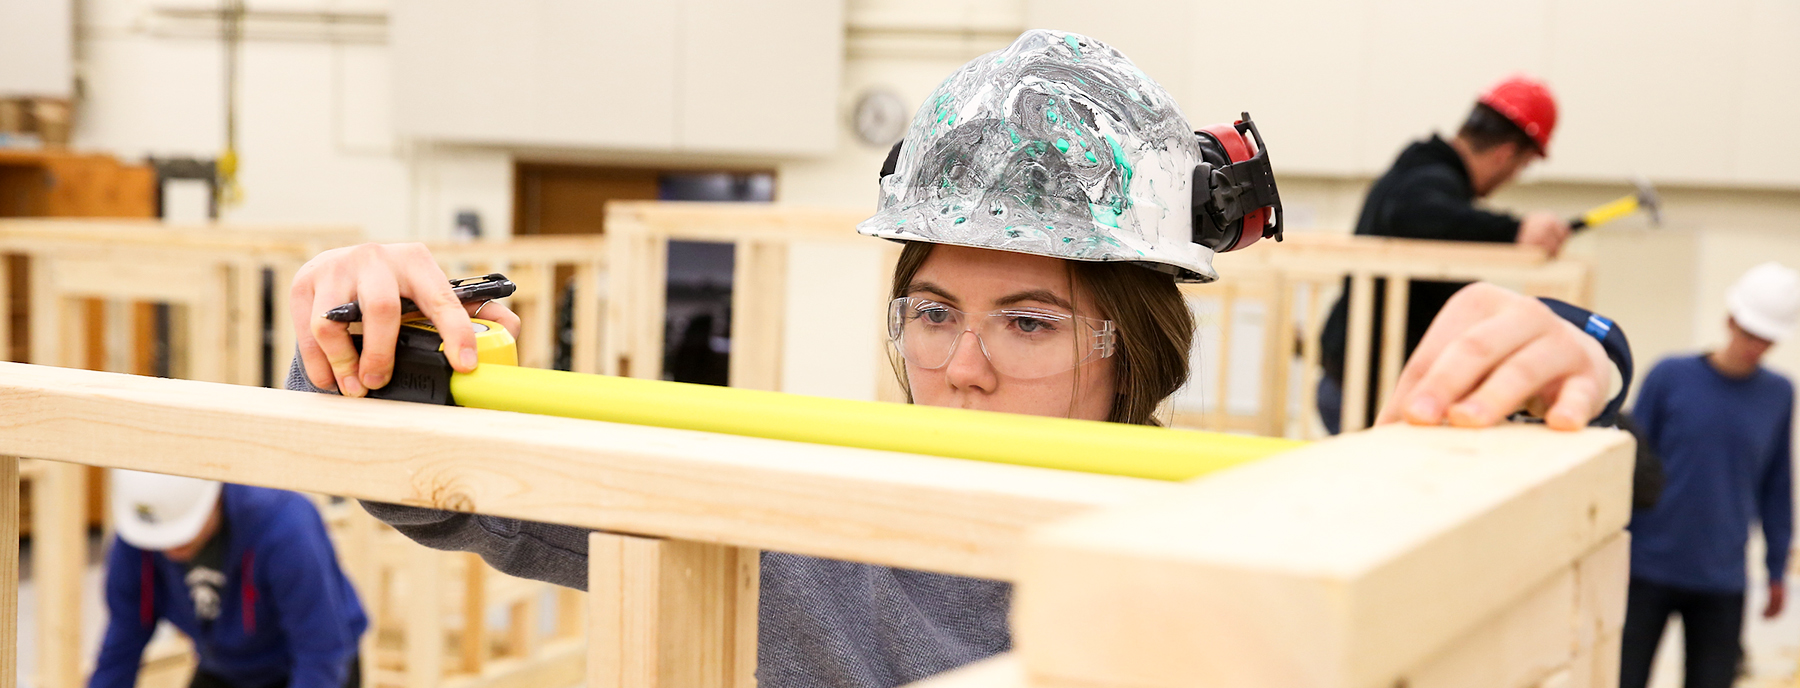 UW-Stout student wears safety equipment and measures project in the Construction Lab.